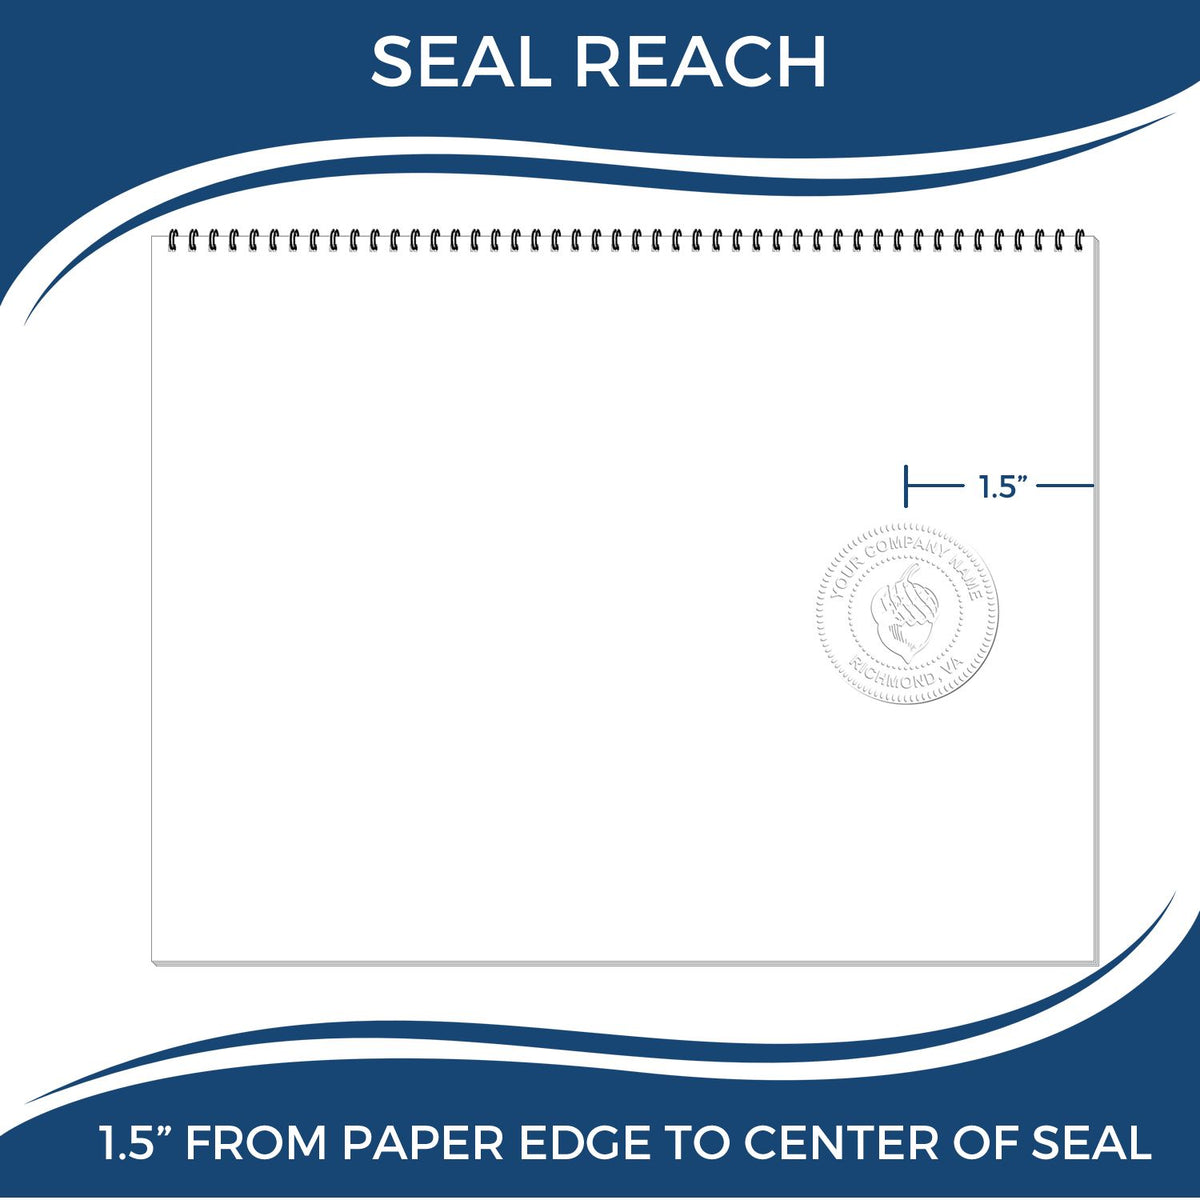 An infographic showing the seal reach which is represented by a ruler and a miniature seal image of the Hybrid New Hampshire Geologist Seal